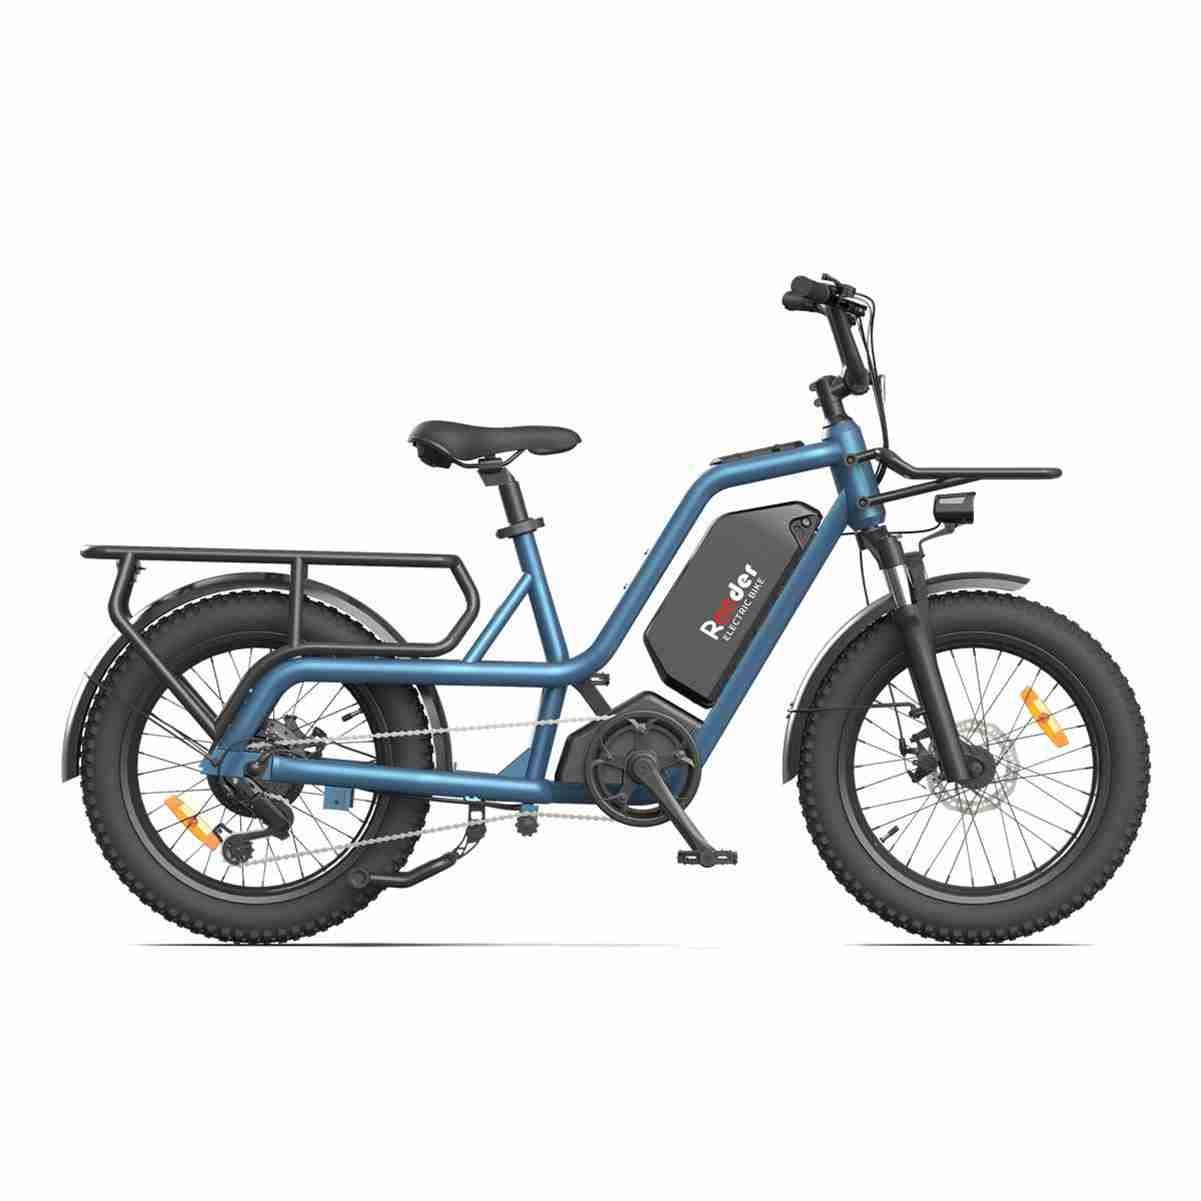 Portable Multifunctional Folding Electric Bicycle